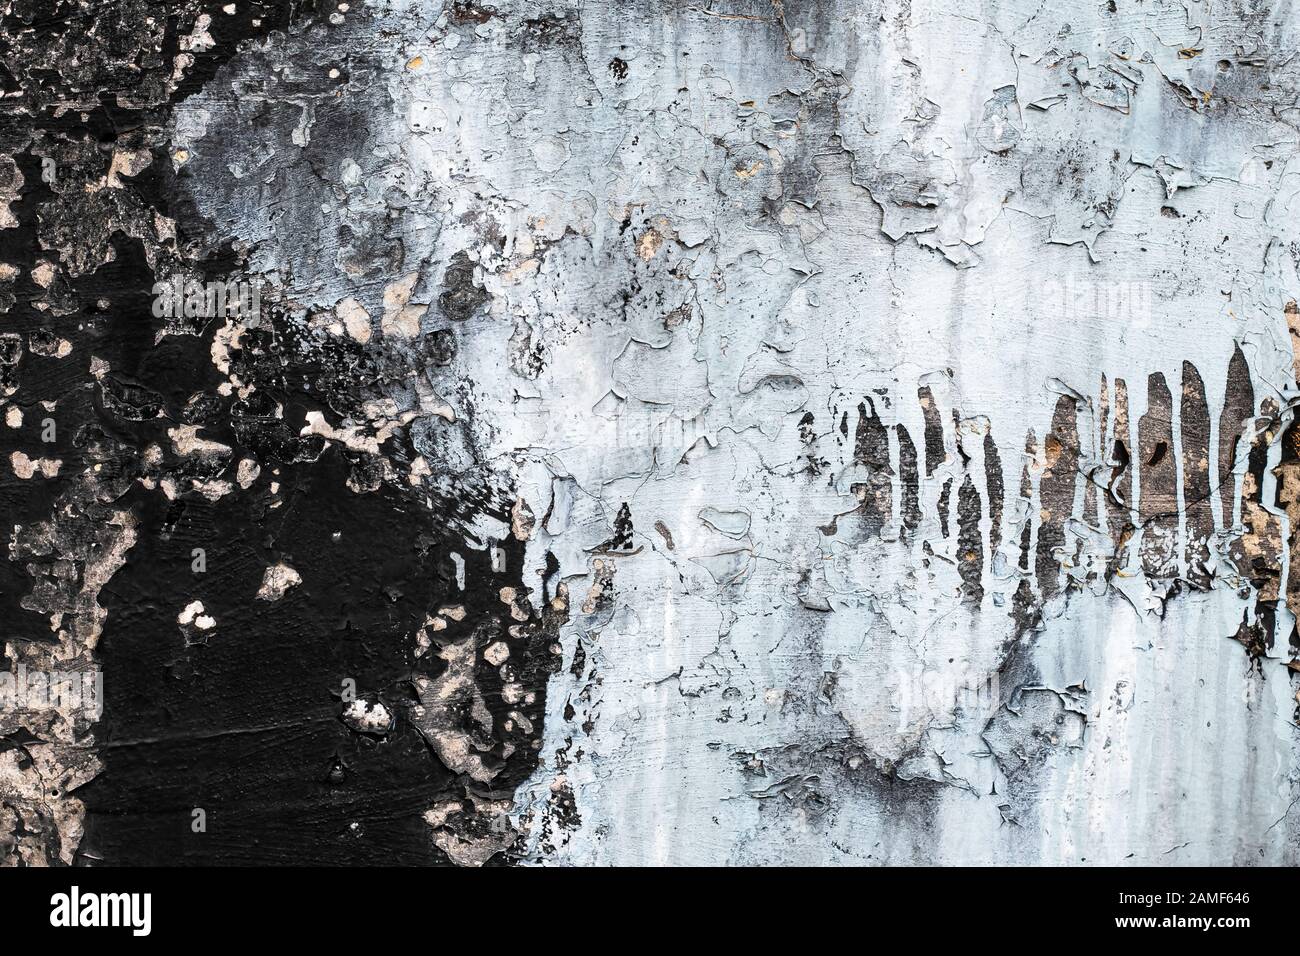 Peeling background. Gray grunge texture. Cement cracked wall. Rough structure. Dripping paint. Old black flaky facade Stock Photo